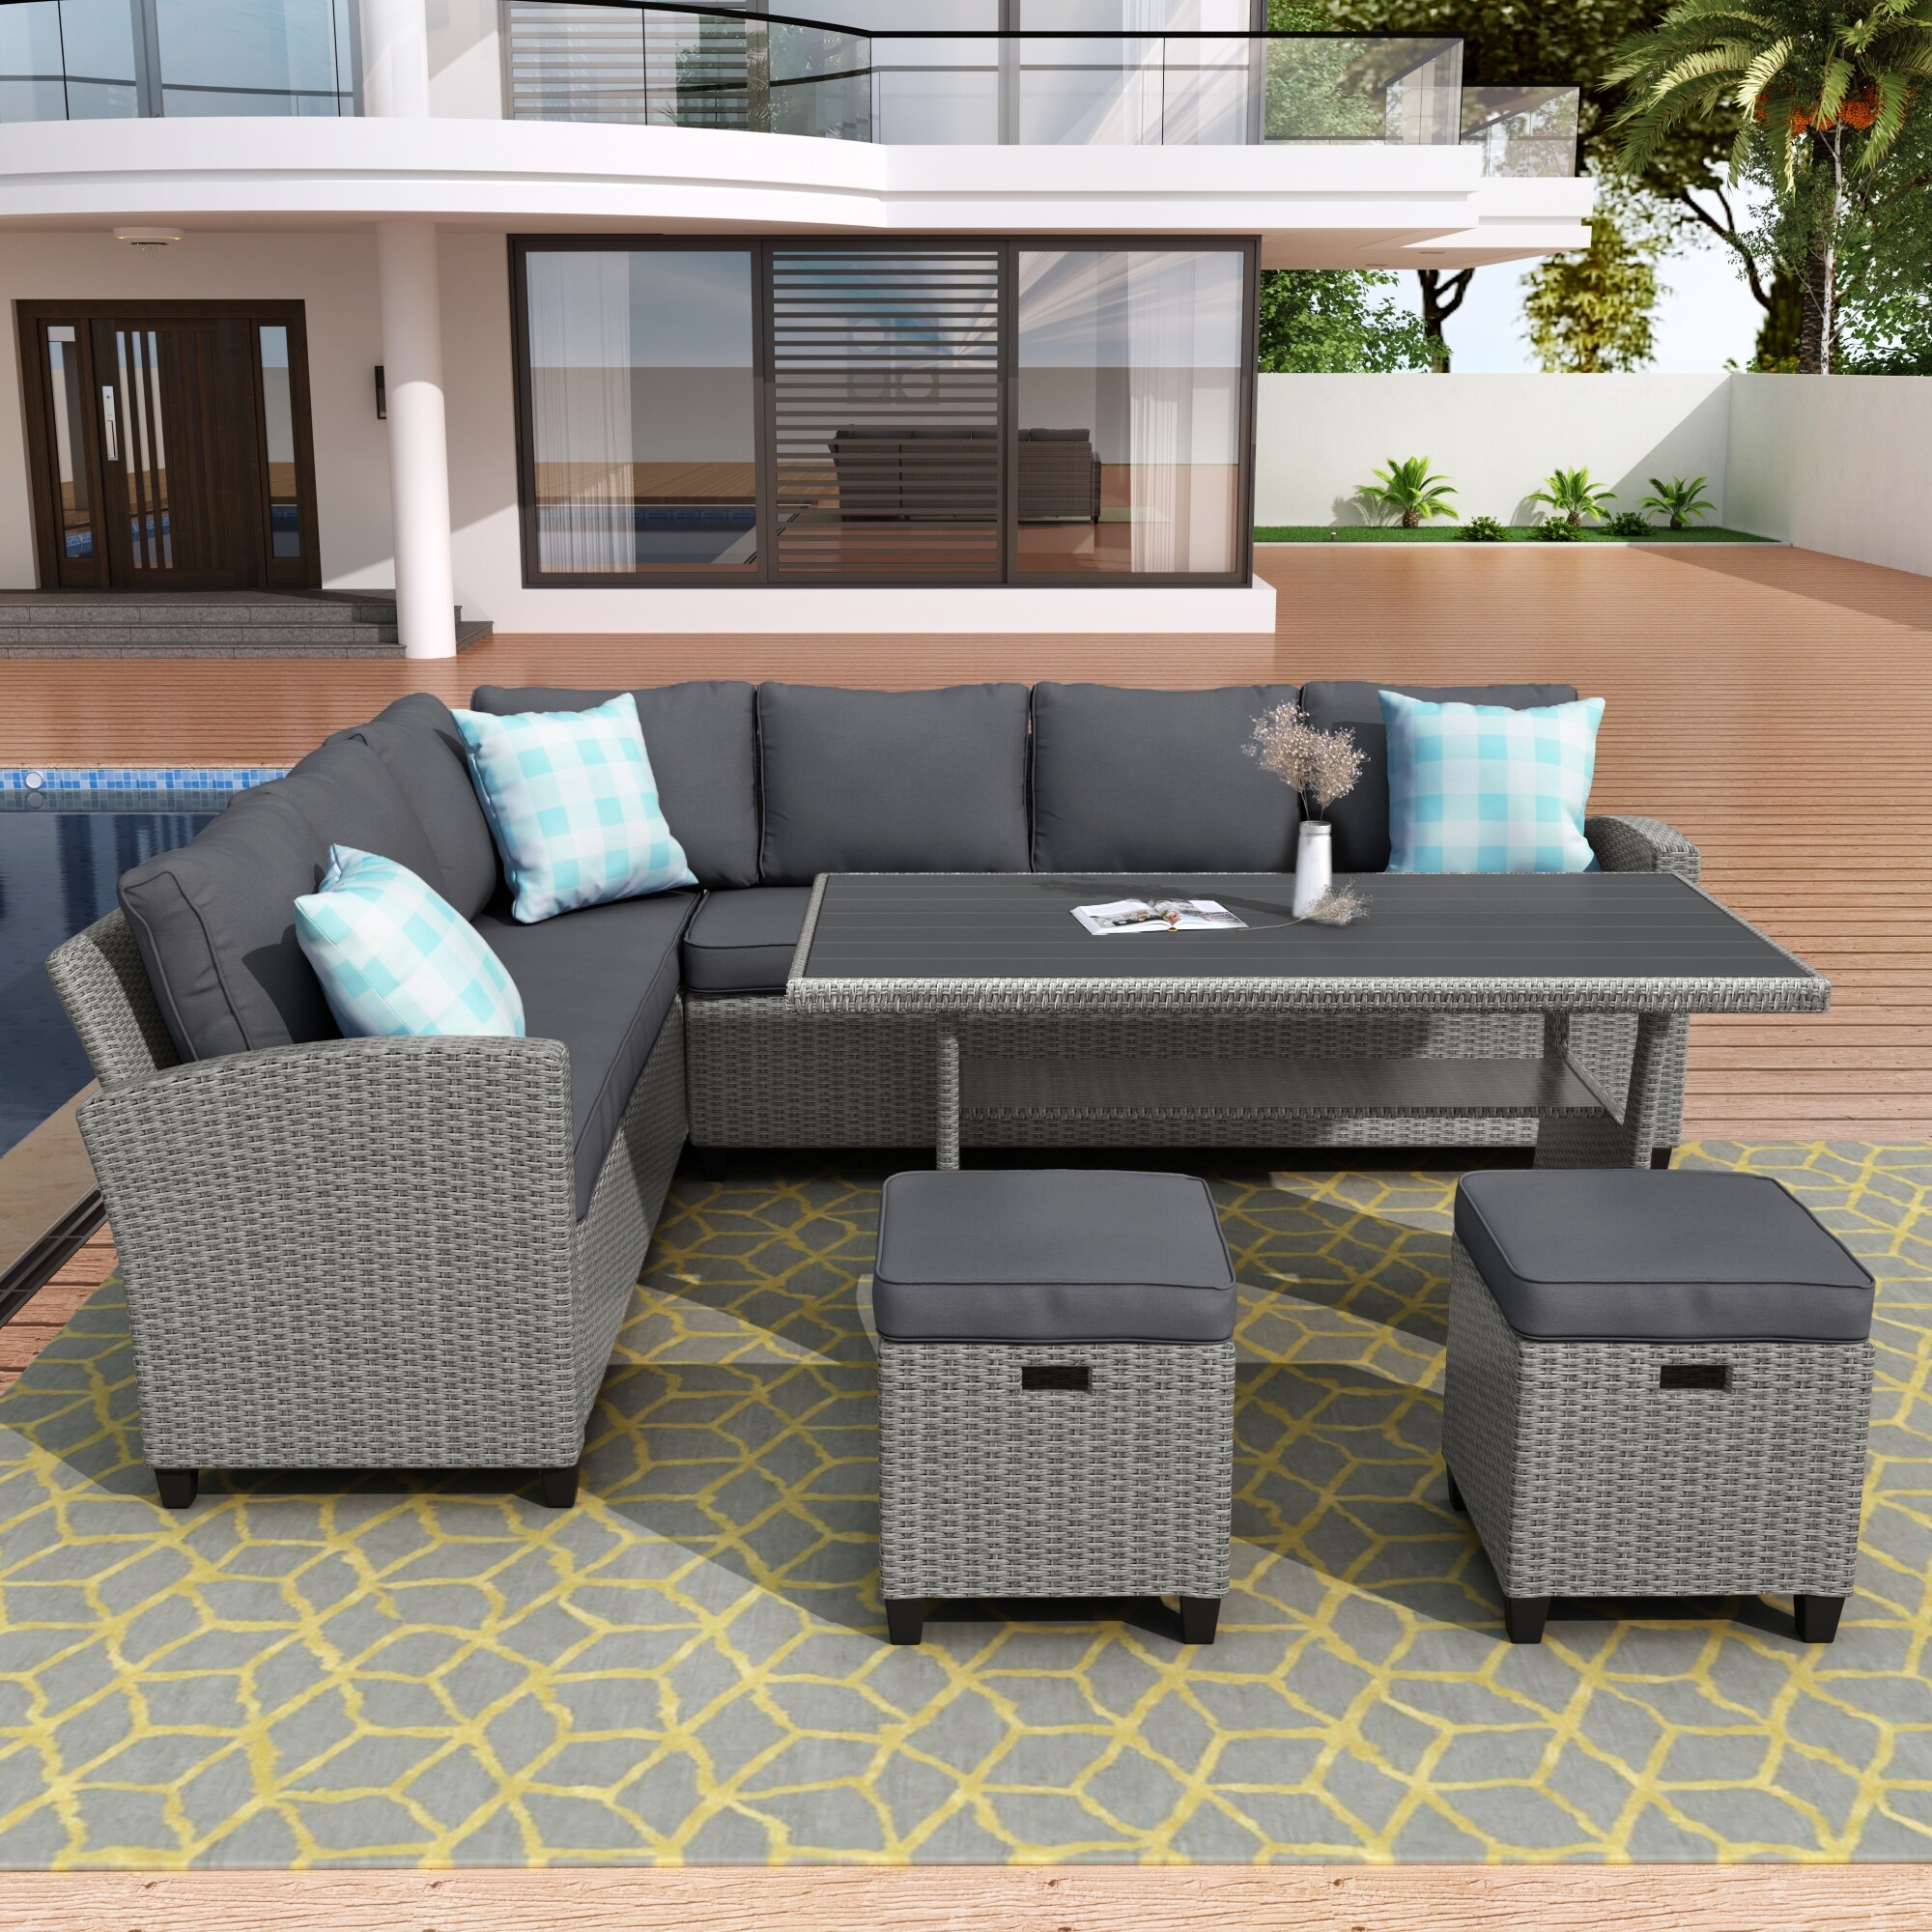 Terrace Furniture Sets Are Designed To Enjoy The Outdoors  Allowing You To Enjoy Afternoon Leisure Time In Comfort